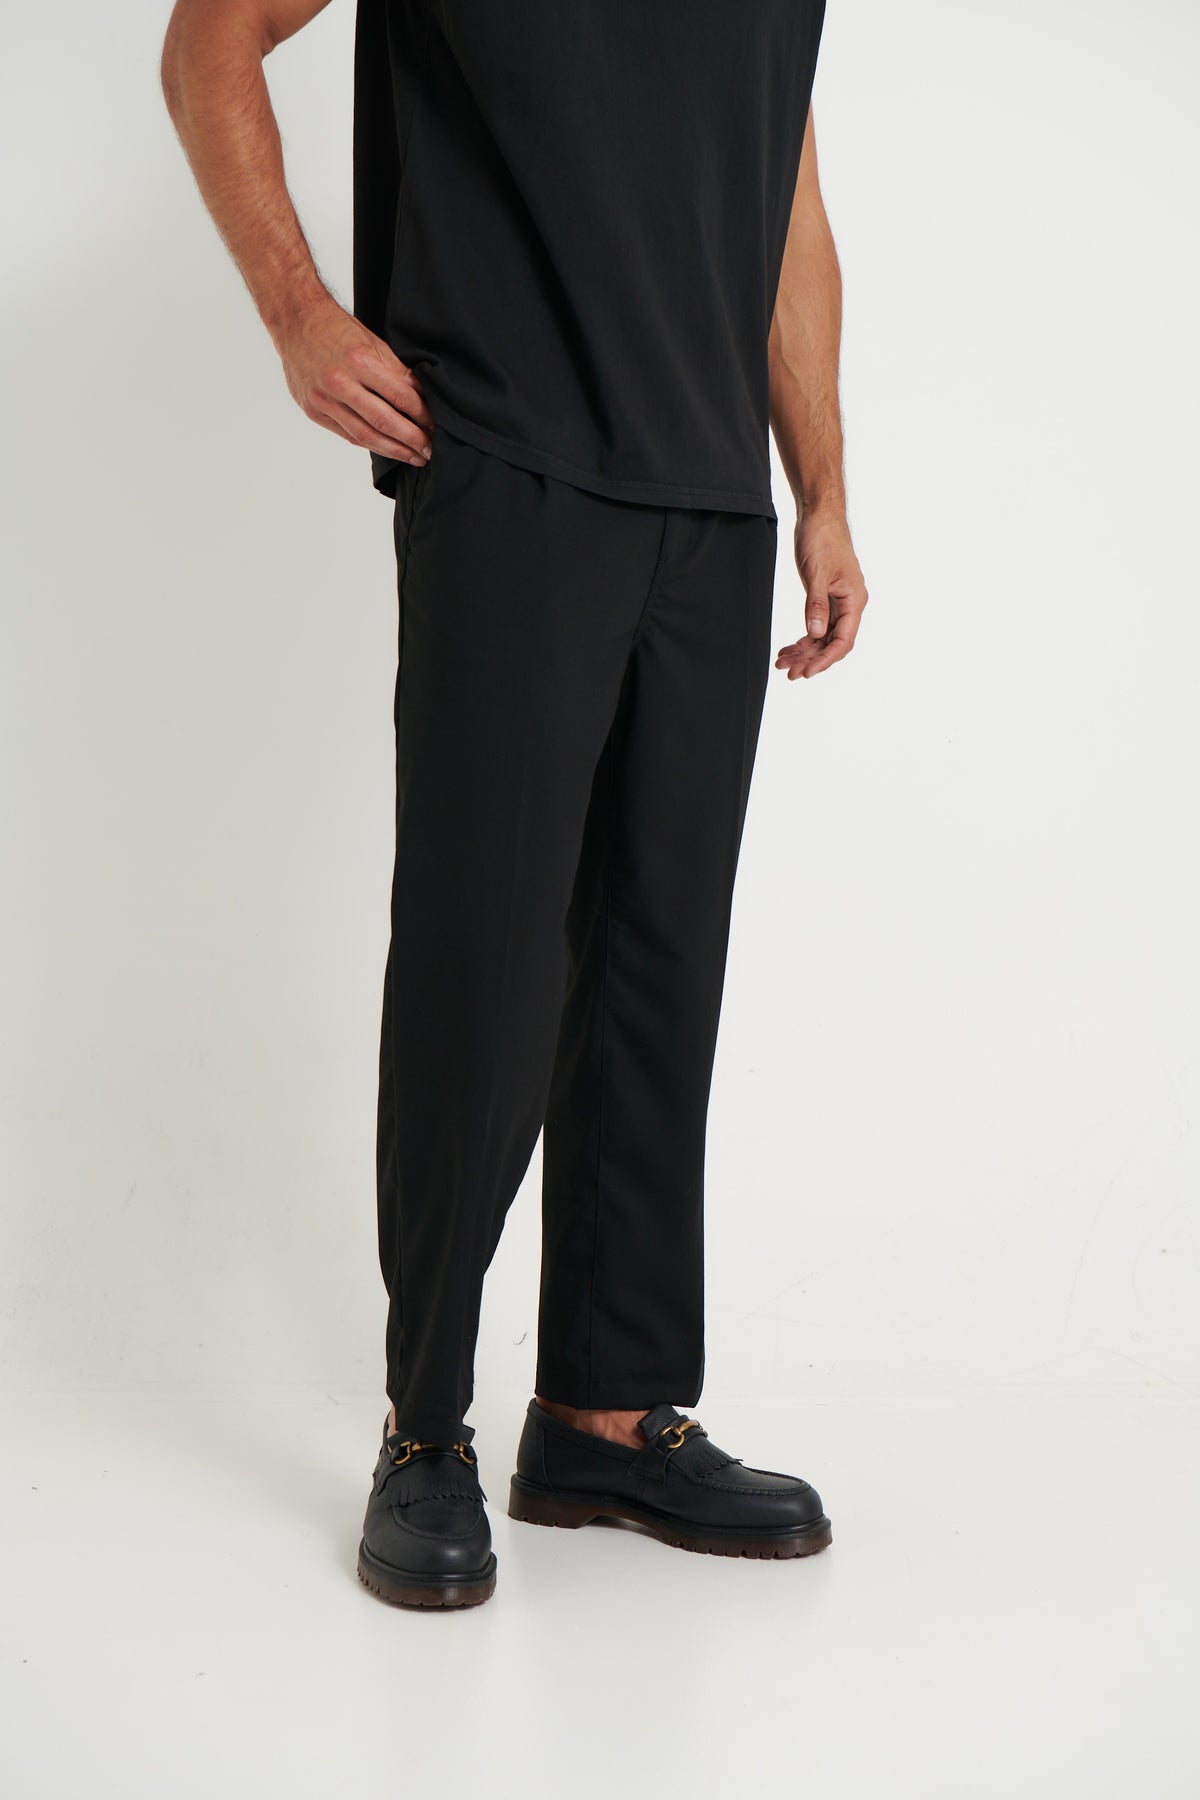 NTH Loose Fit Trouser Black